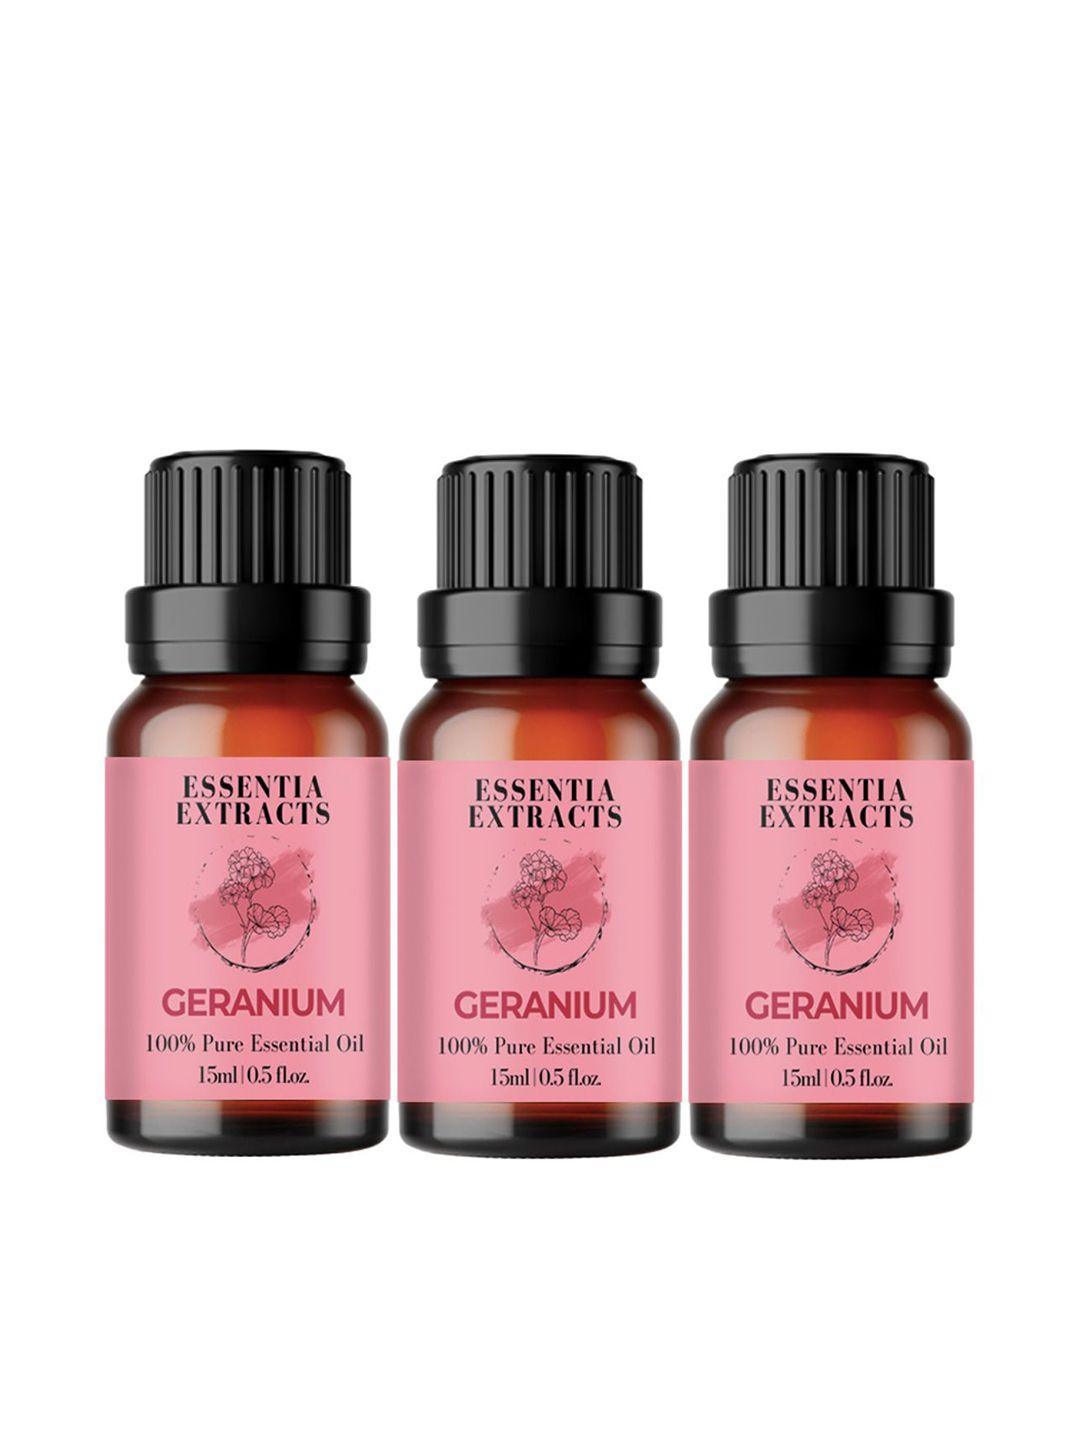 essentia extracts set of 3 pure geranium essential oils to fight acne breakouts- 15ml each